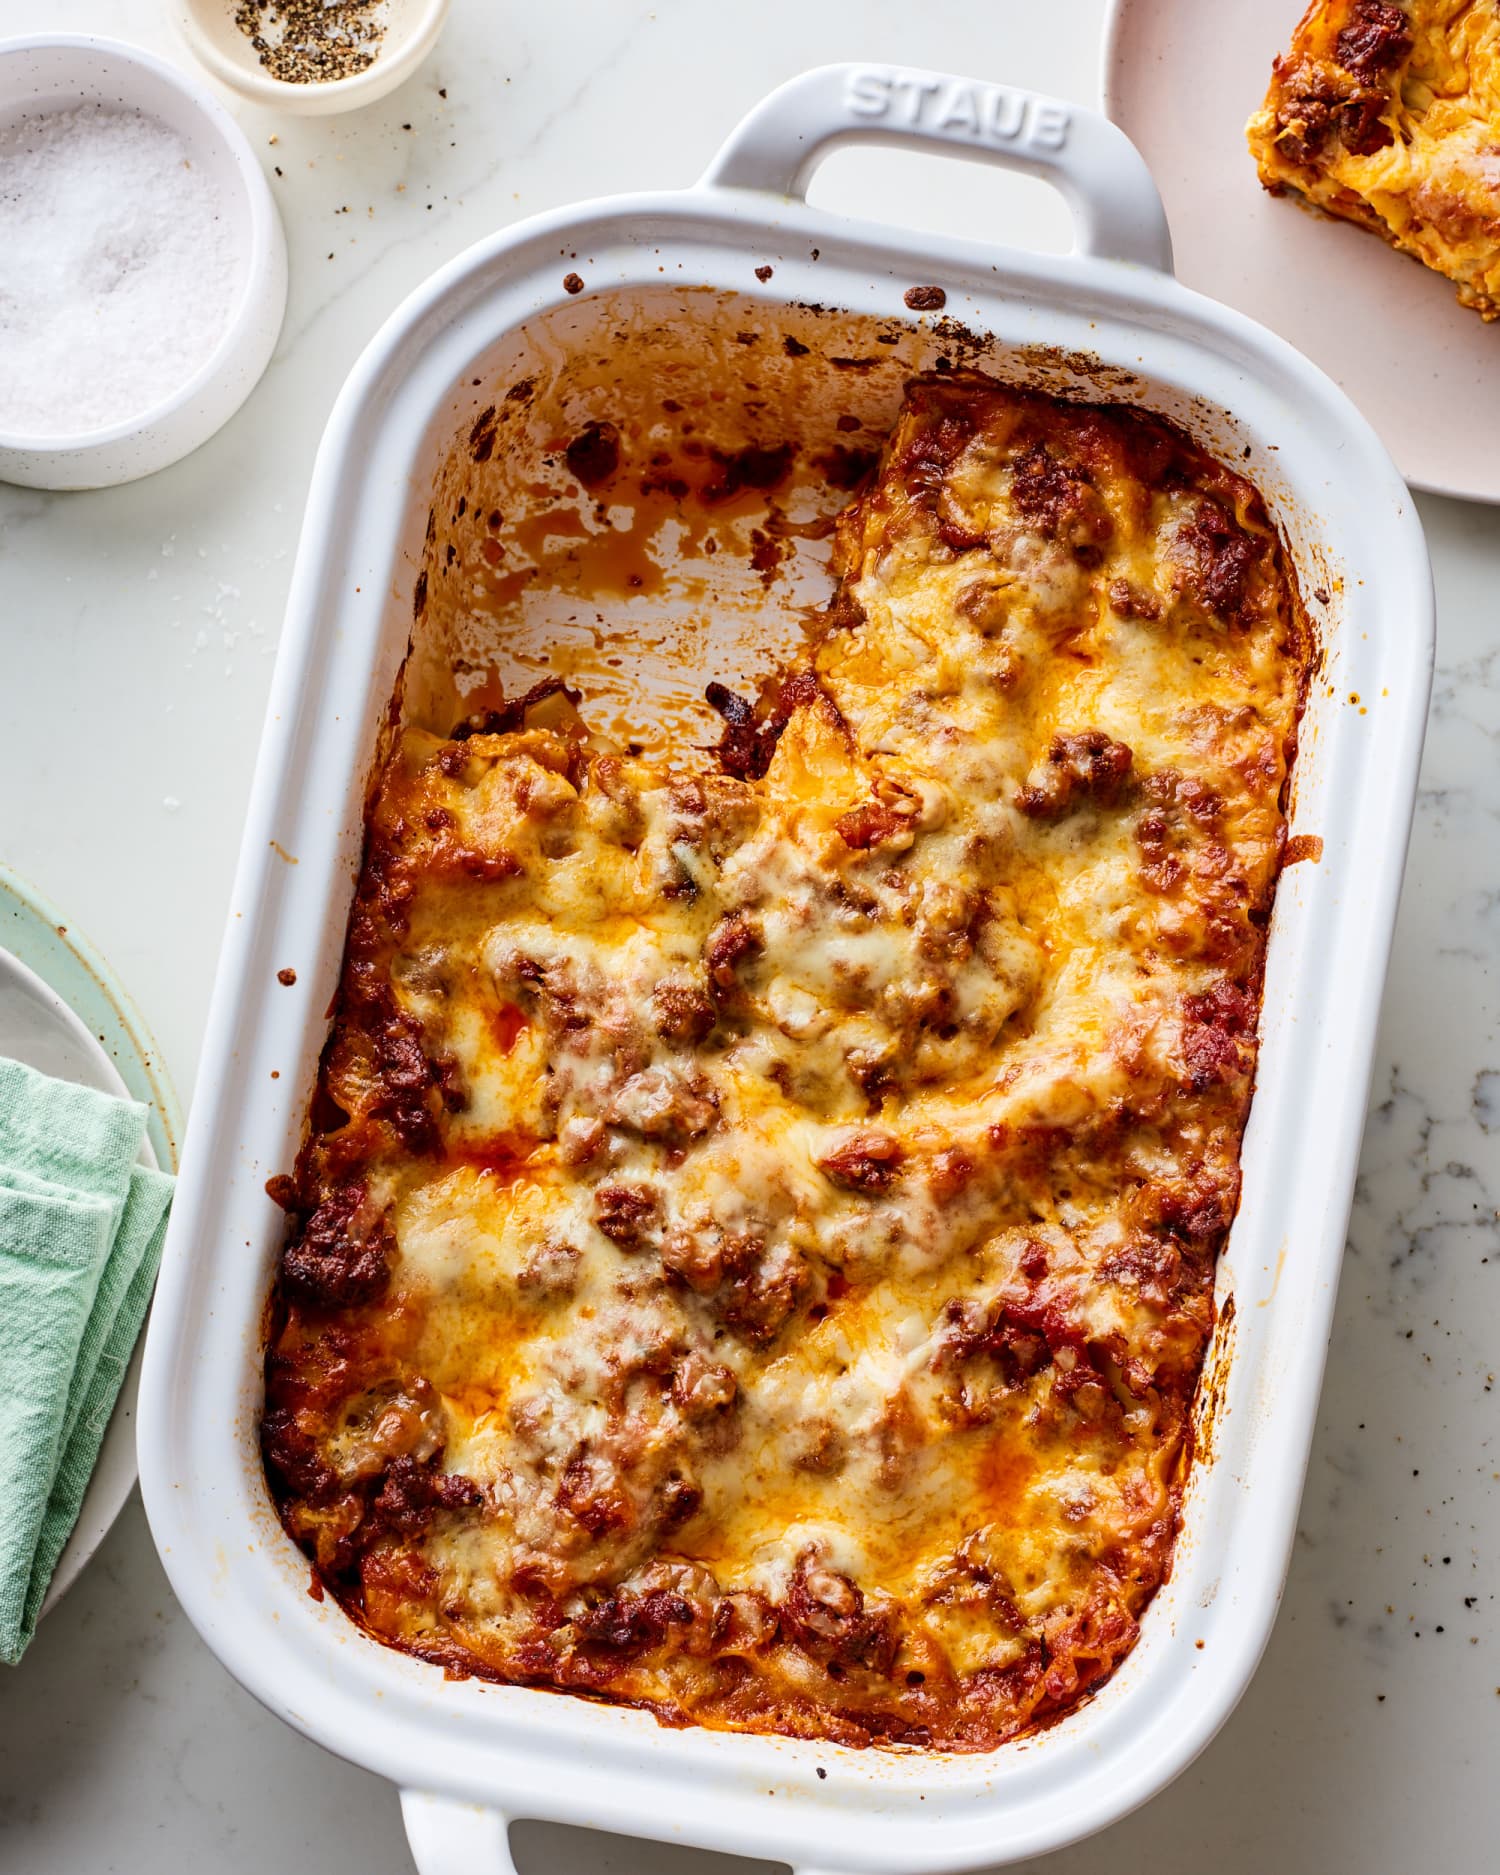 3 Brands of Store-Bought Frozen Lasagna That Are (Almost) Better than Homemade